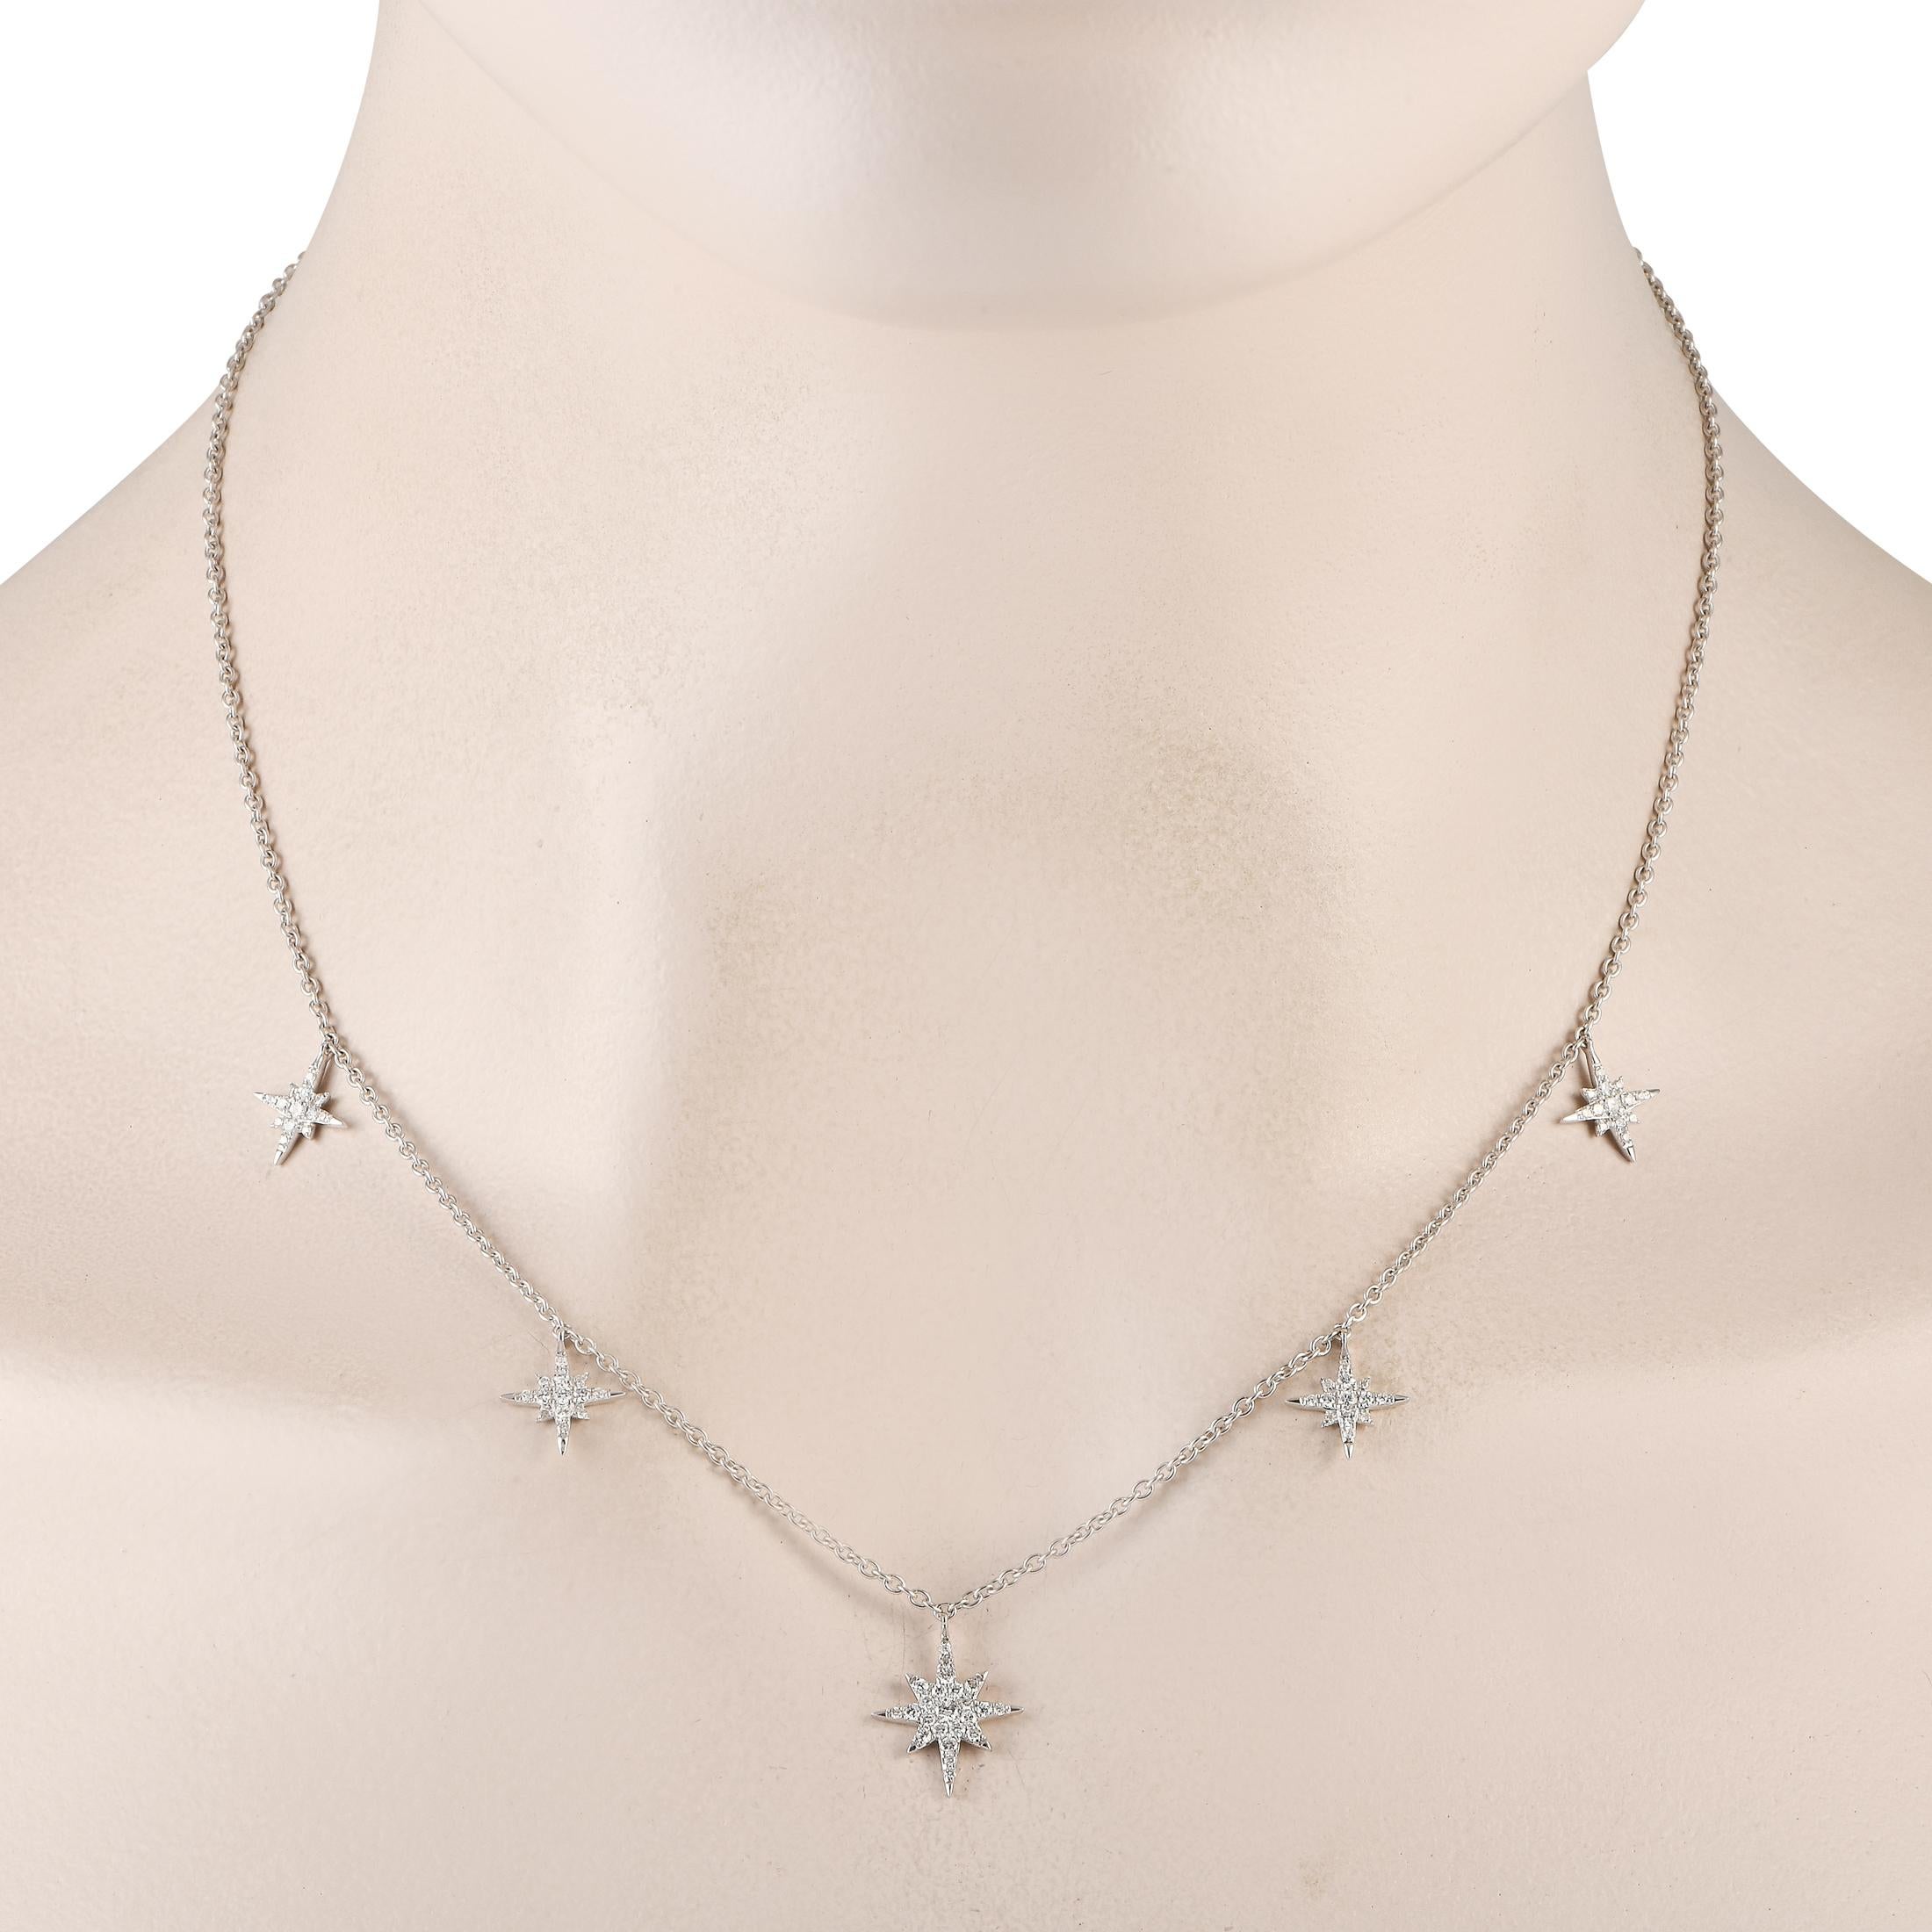 A series of star-shaped pendants covered in sparkling diamonds totaling 0.50 carats allow this 18K white gold necklace to continually catch the light. This piece features an 18 chain and a central pendant that measures 0.65 long by 0.50 wide. This